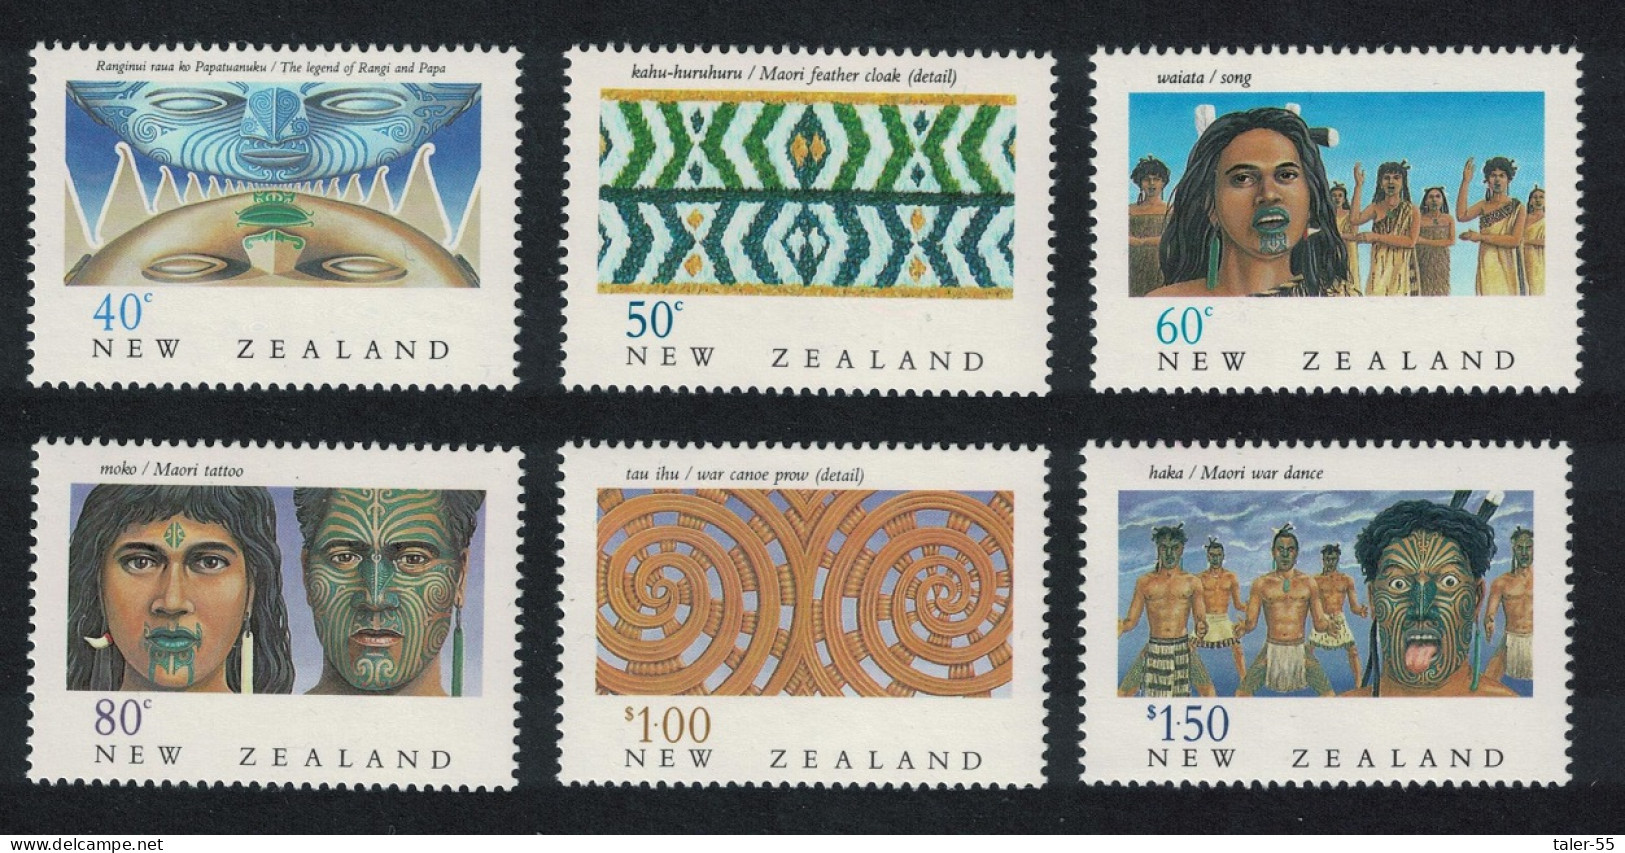 New Zealand Heritage 6th Issue The Maori 6v 1990 MNH SG#1562-1567 - Unused Stamps